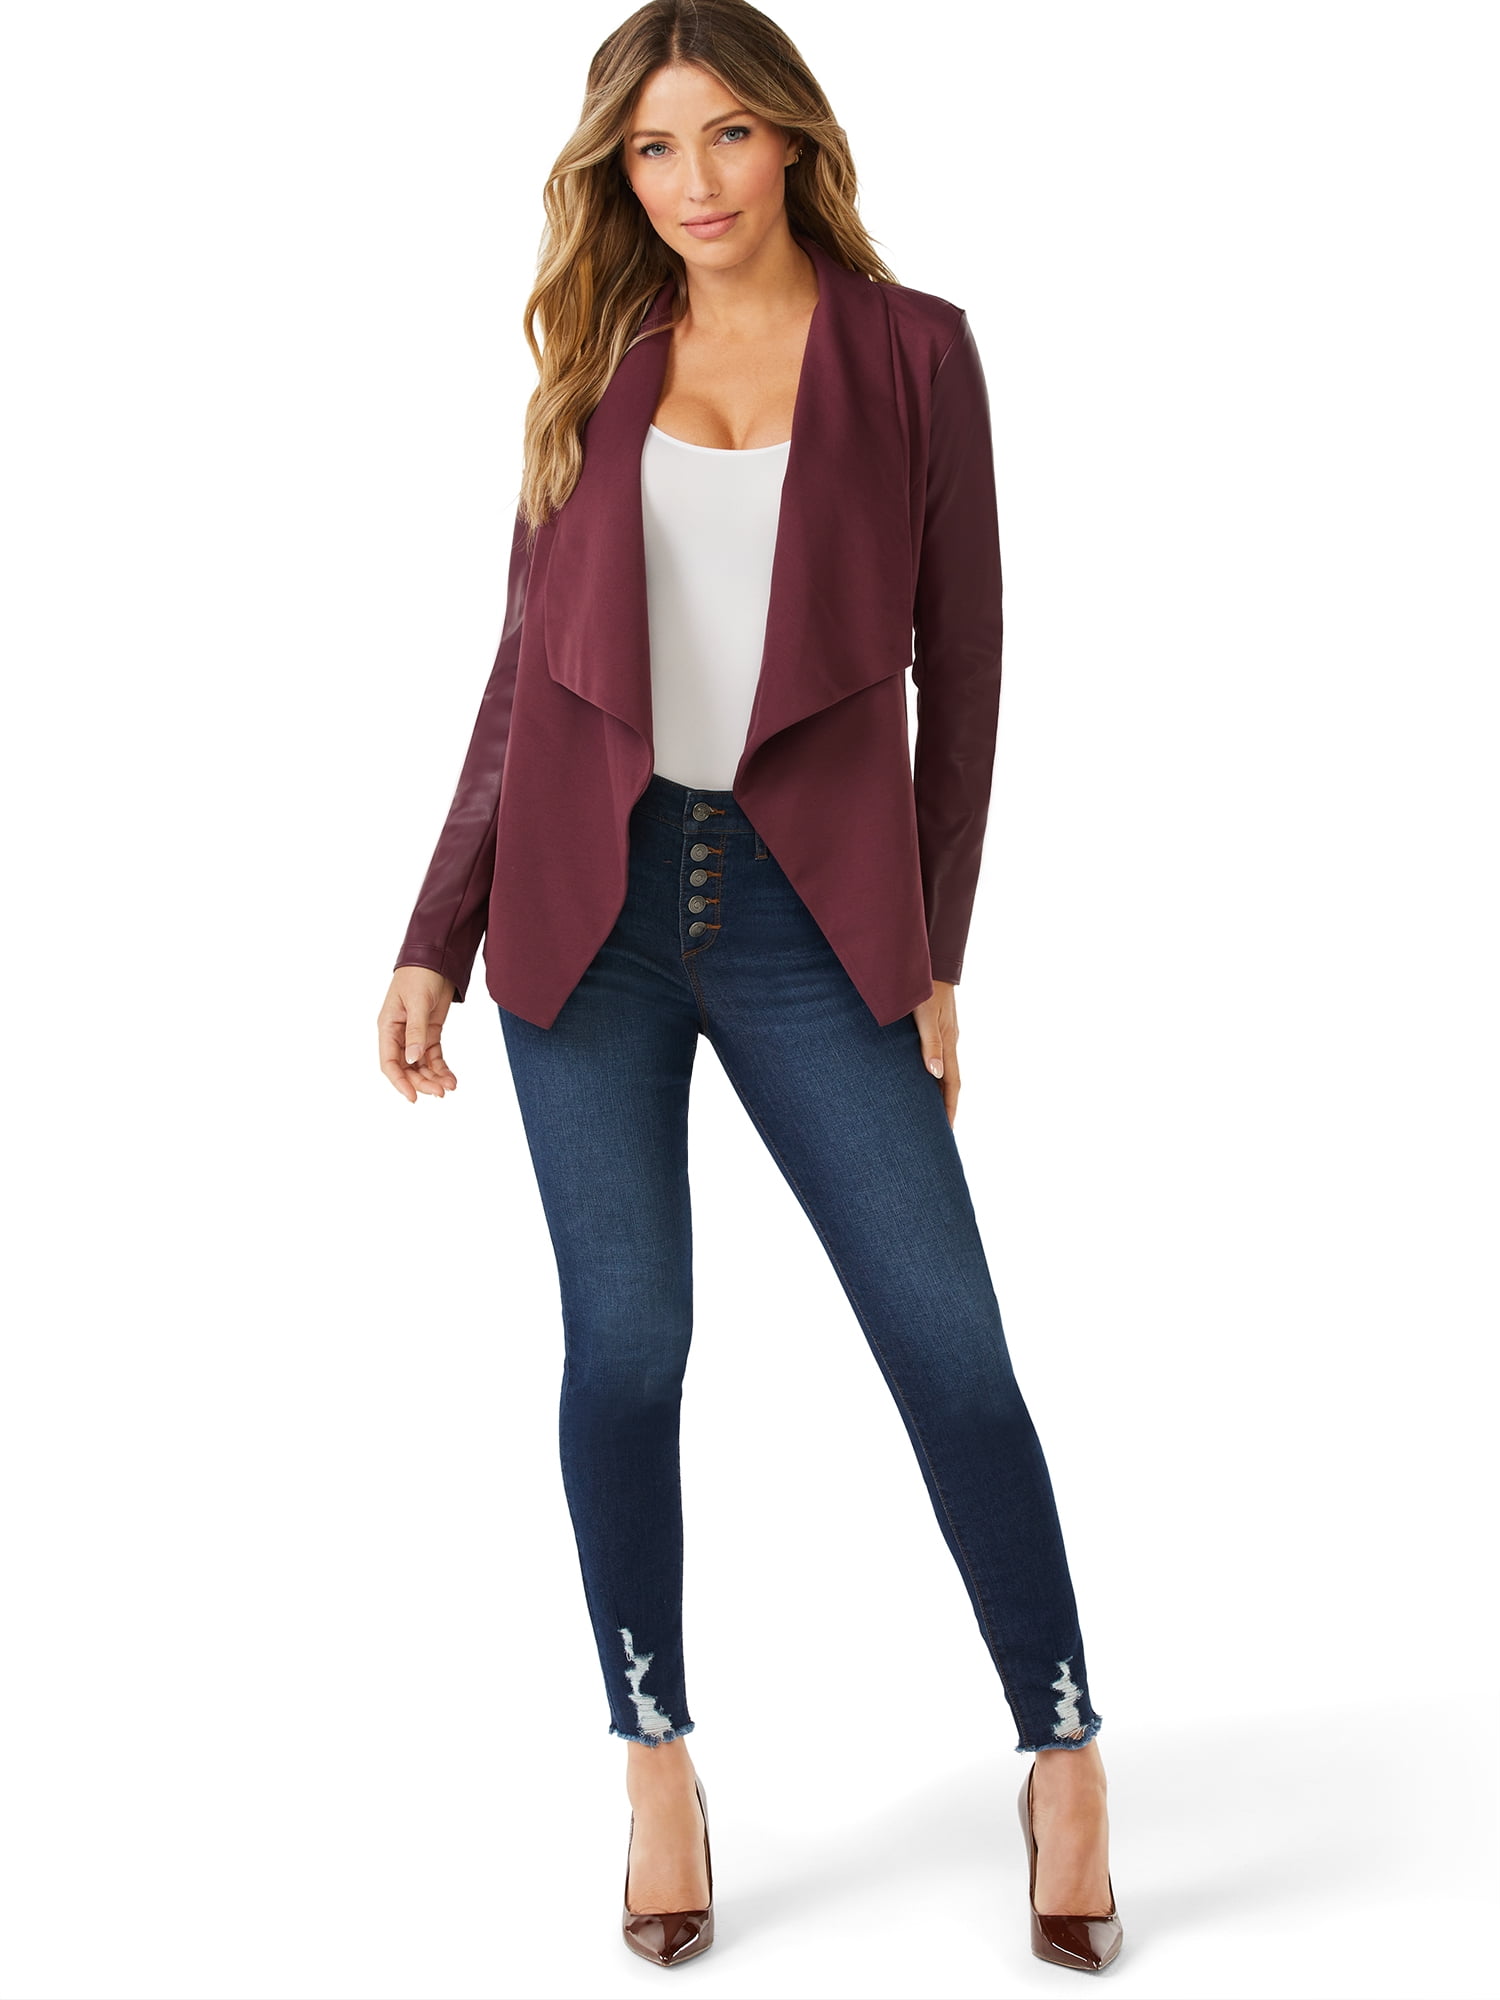 Sofia Jeans by Sofia Vergara Women's Drape Front Jacket with Faux Leather  Sleeves 